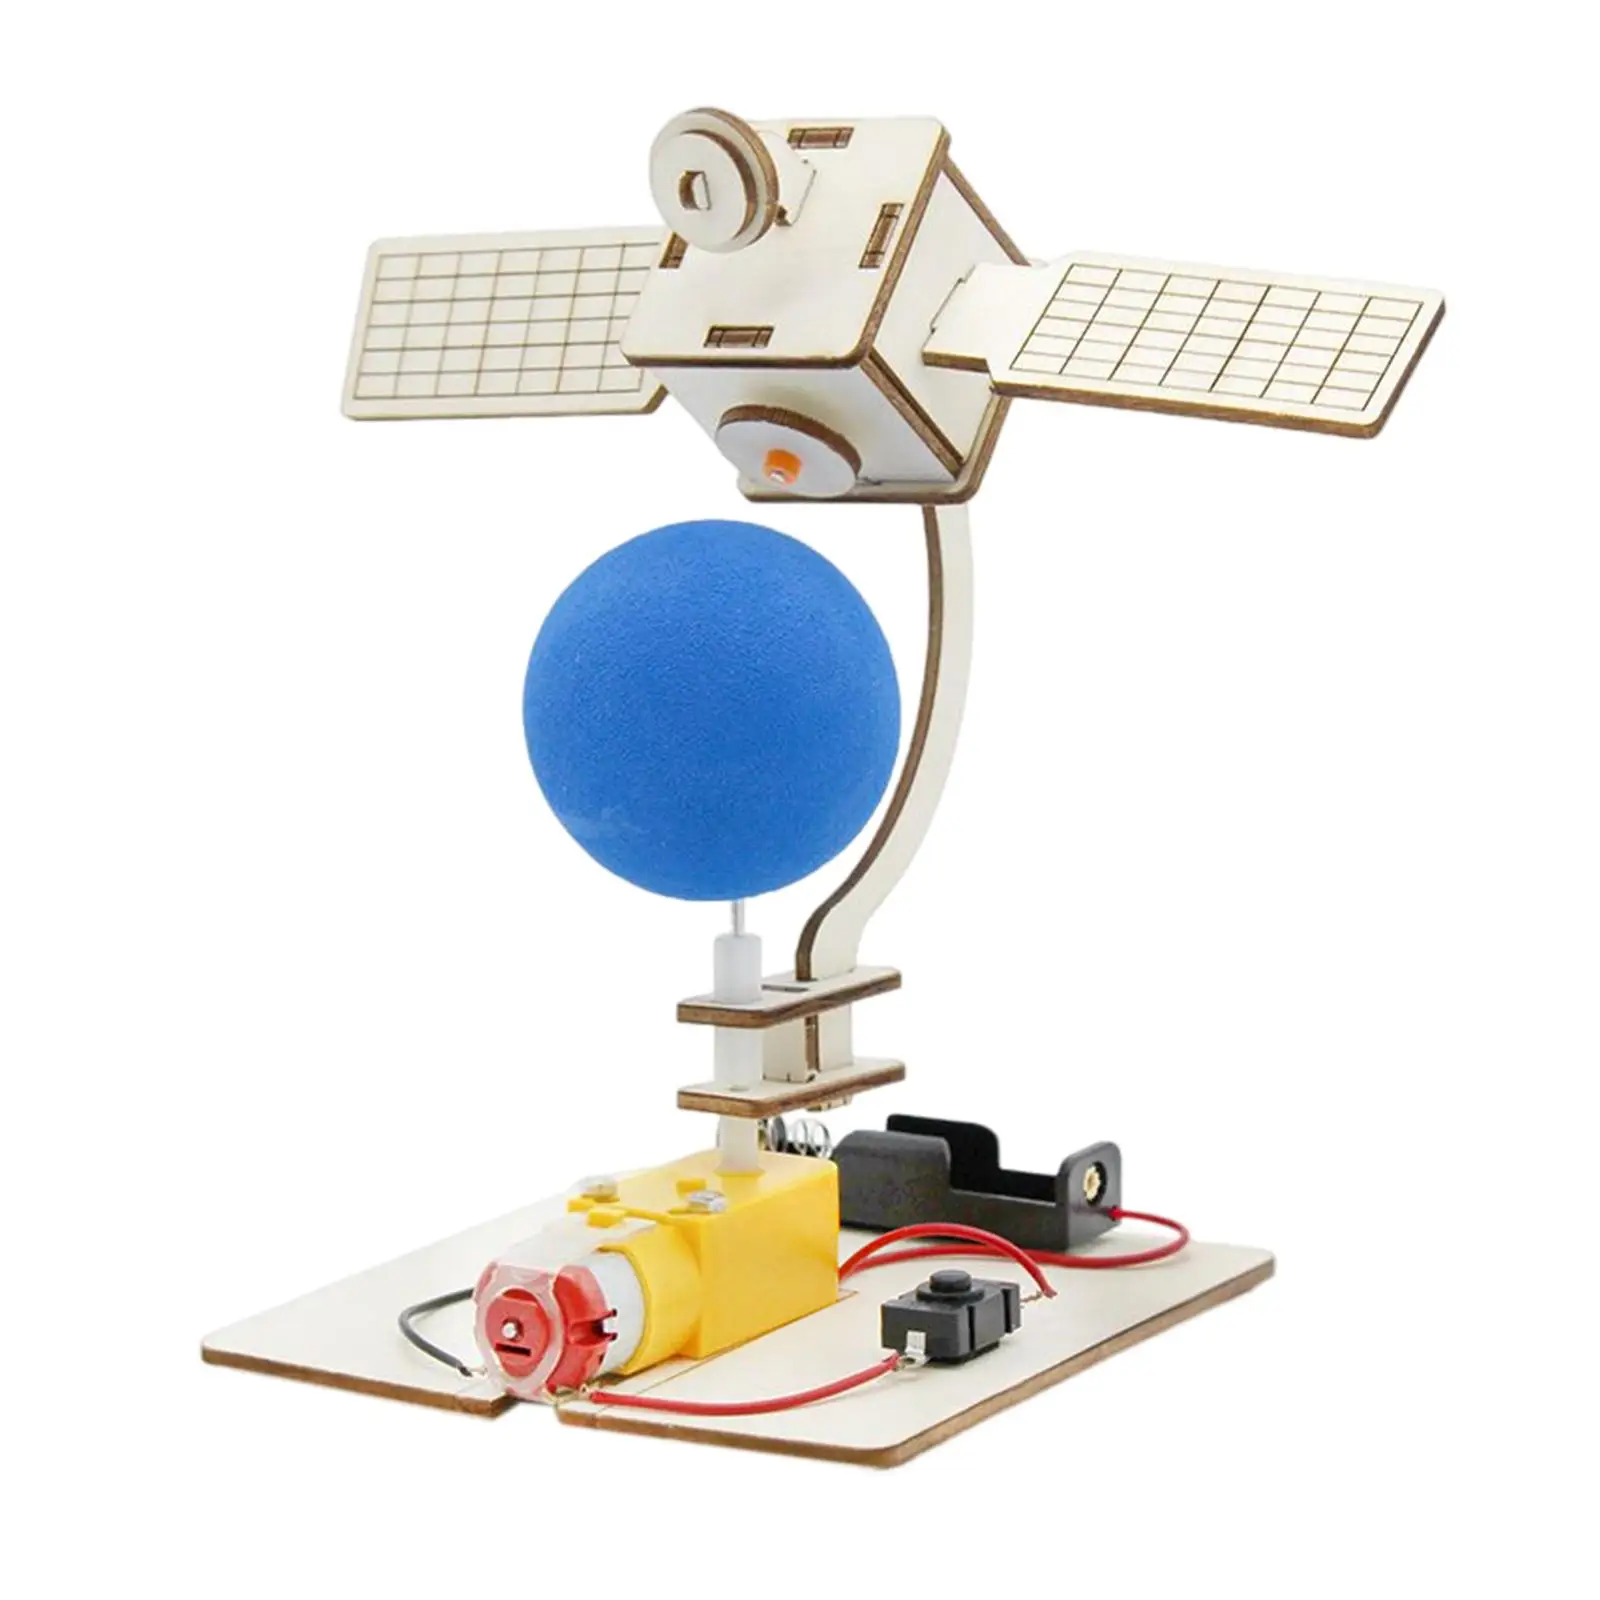 

Home Wooden Science Experiment Set Satellite Experiment Project Assembly Stem Building Toy Crafts Gift DIY for Woodworking Teens